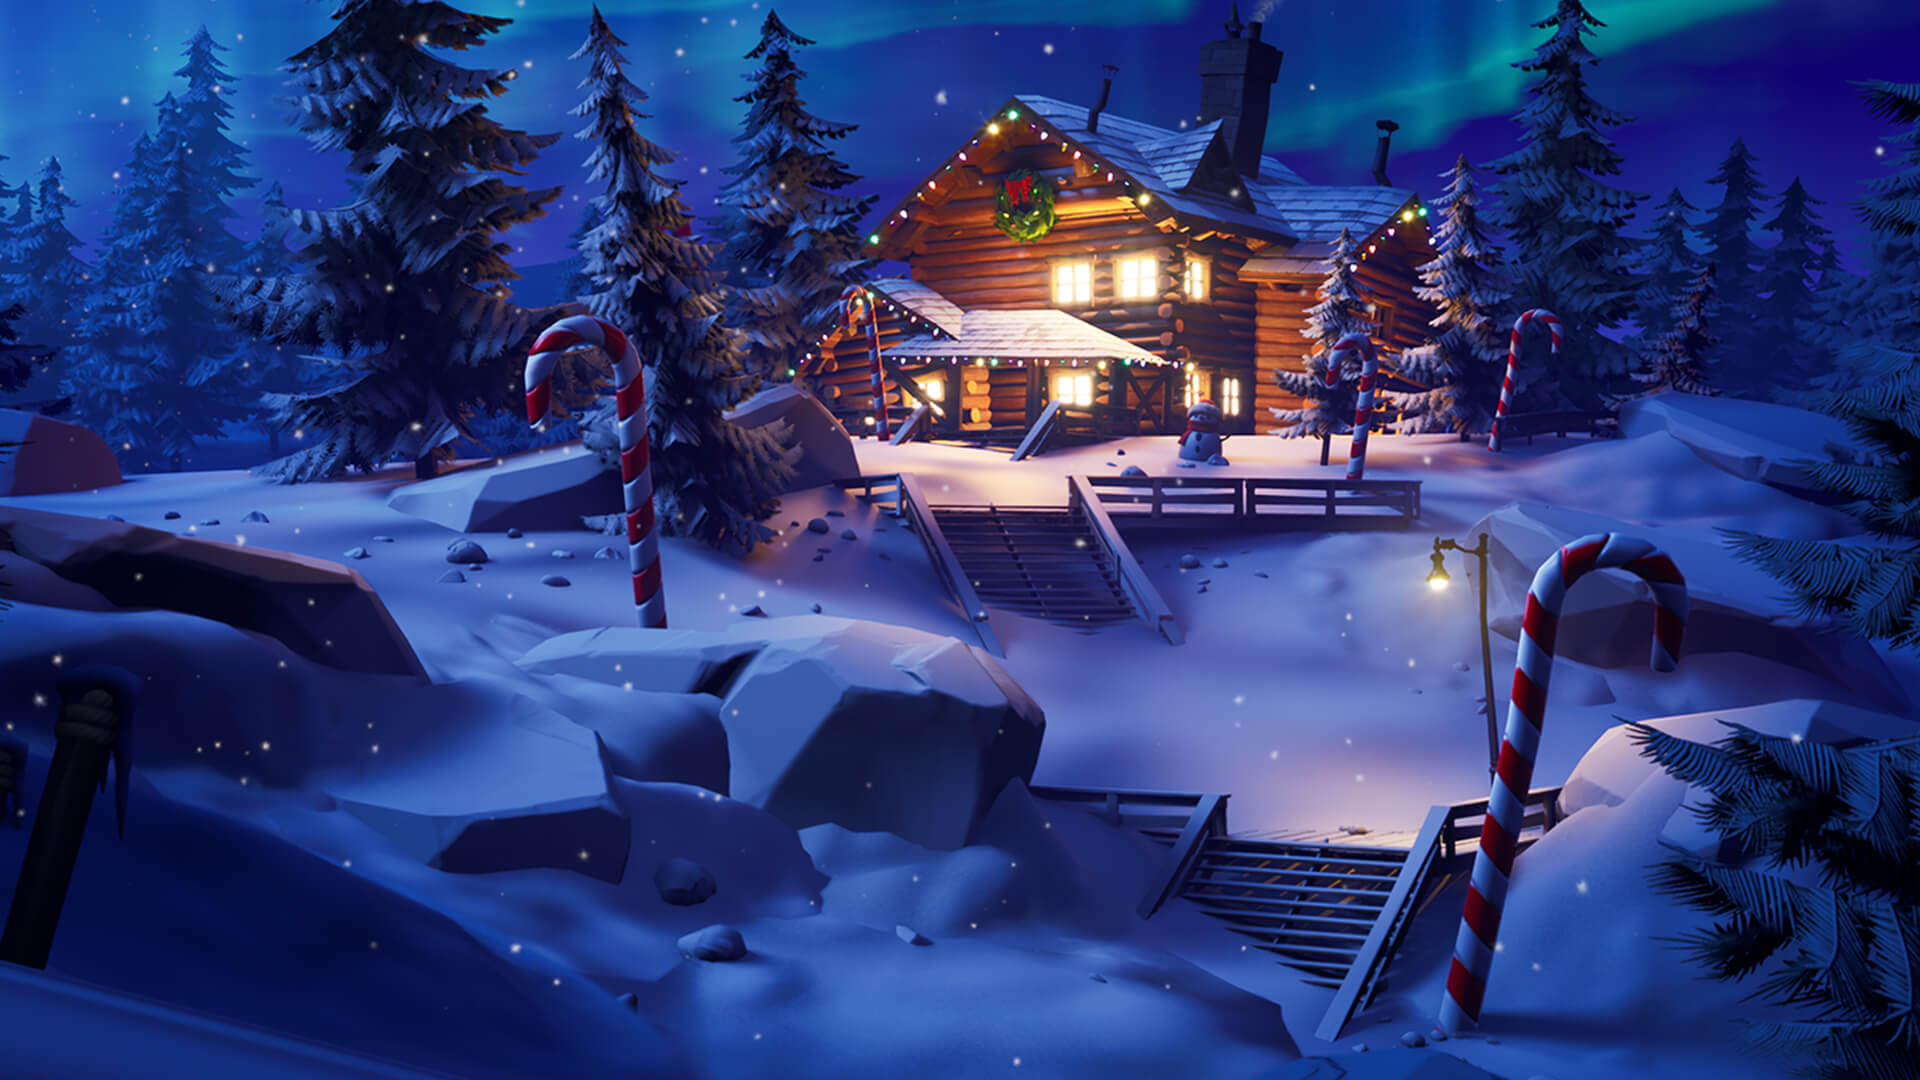 Shiver Fortnite Wallpapers